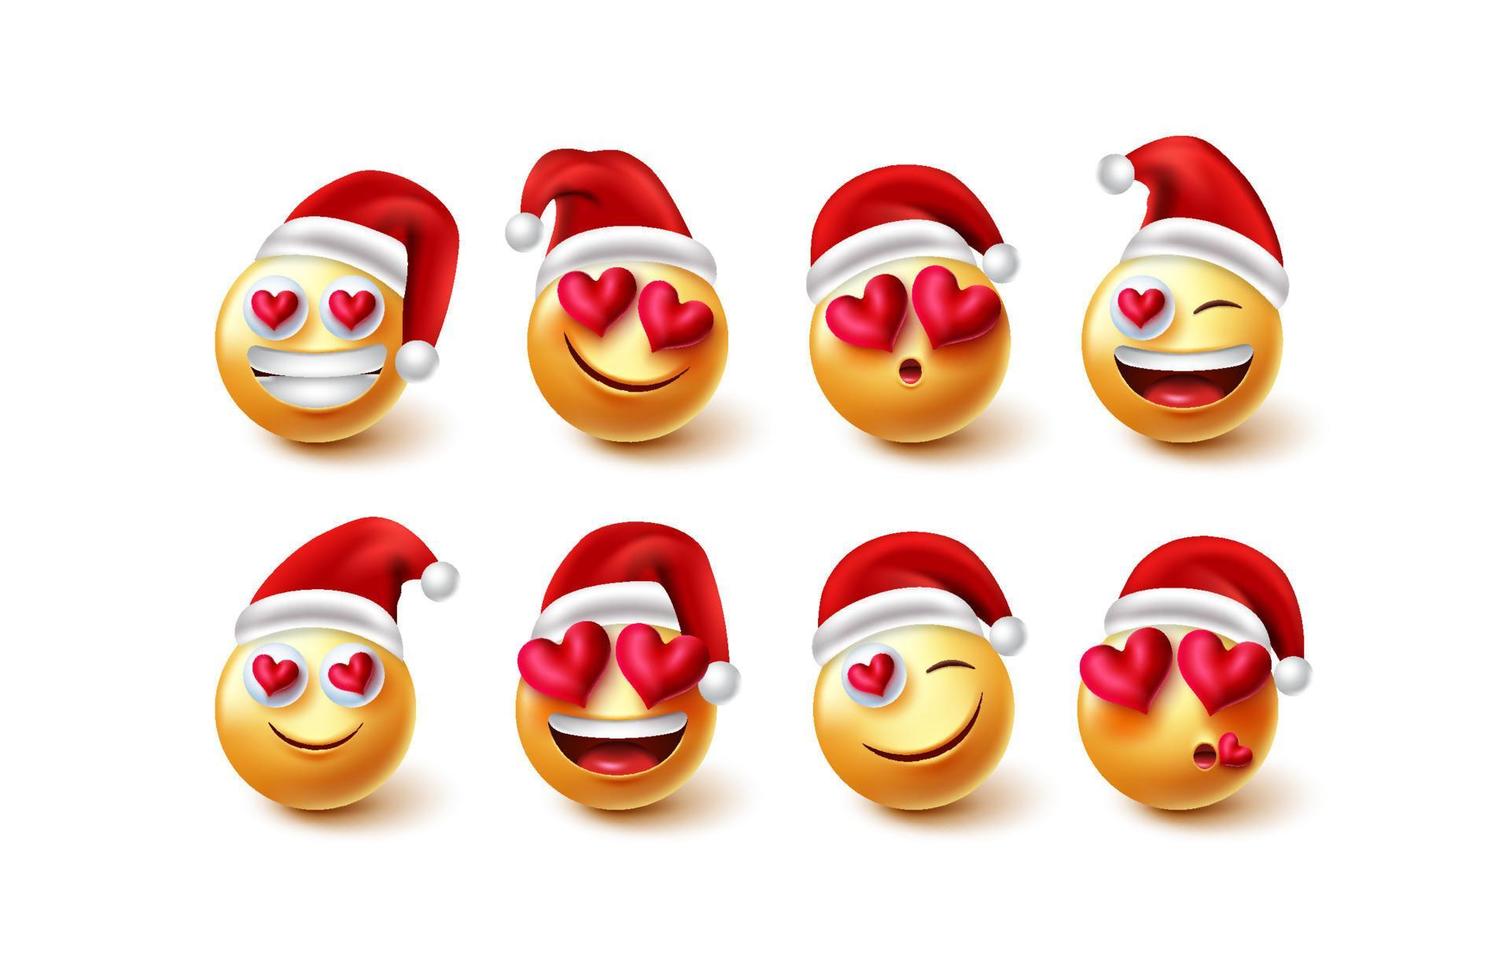 Emojis in love santa vector set. Emoji christmas characters with inlove facial expressions isolated in white background for lovely xmas emoticon character collection design. Vector illustration.